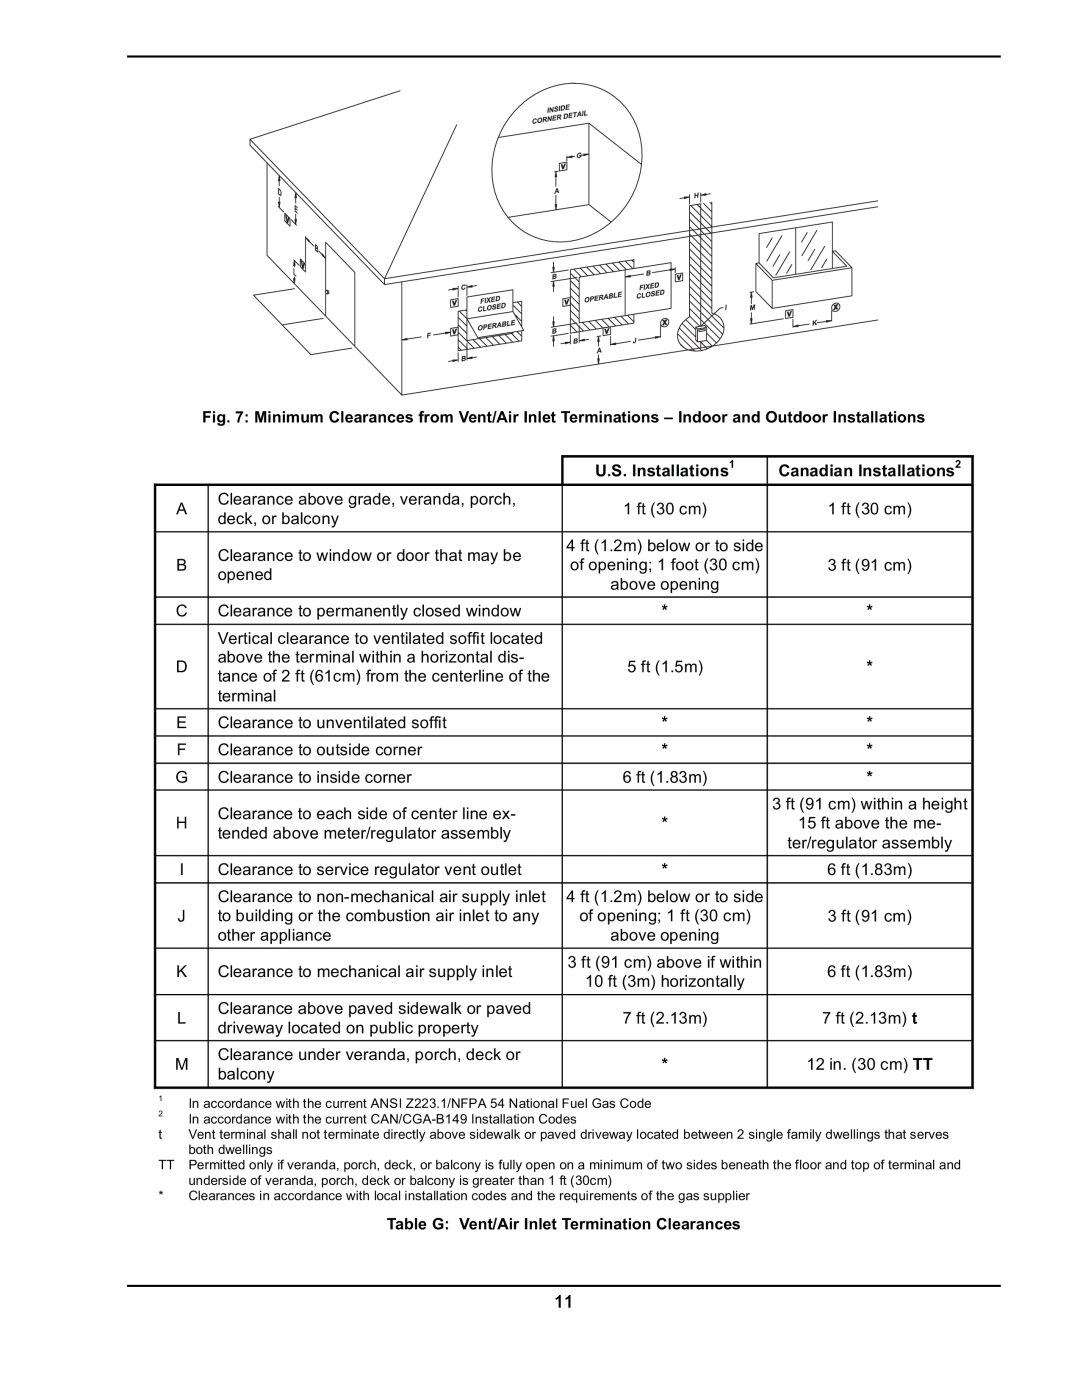 Raypak 302A-902A manual U.S. Installations1, Canadian Installations2, Table G Vent/Air Inlet Termination Clearances 